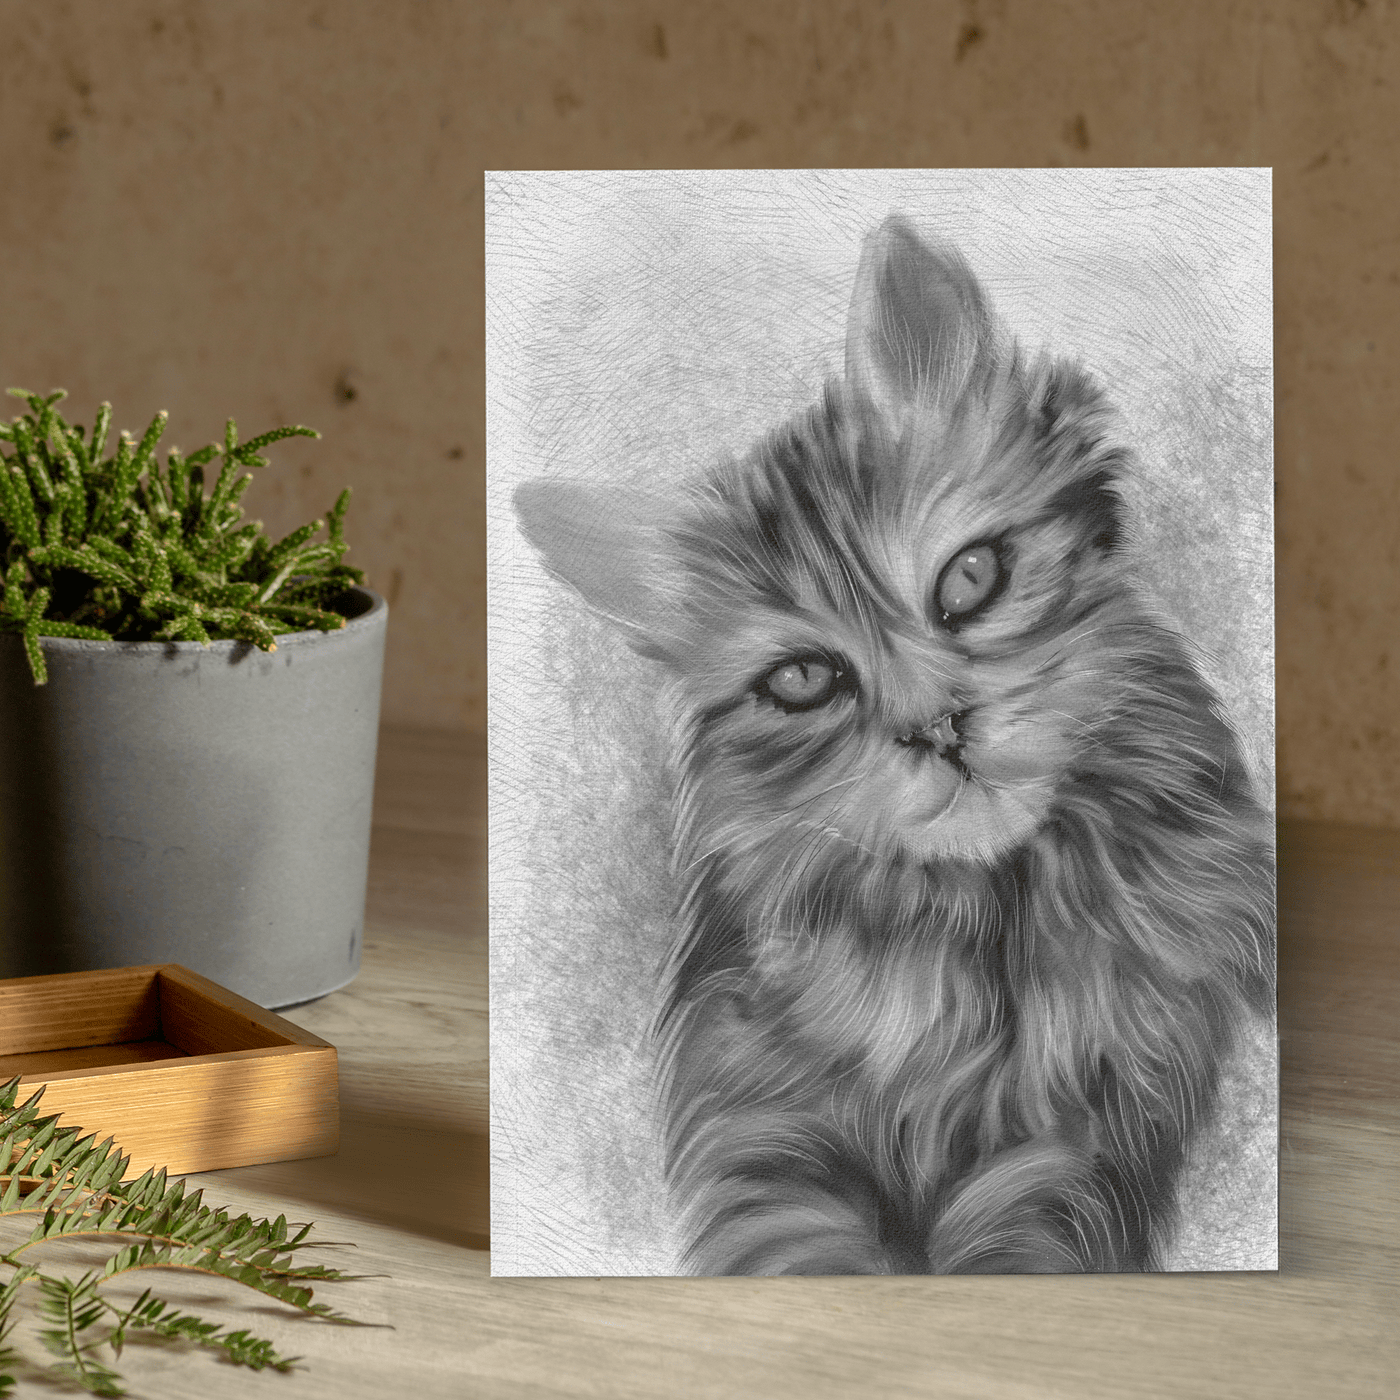 cat pencil portrait of an adorable fur cat drawn in black and white